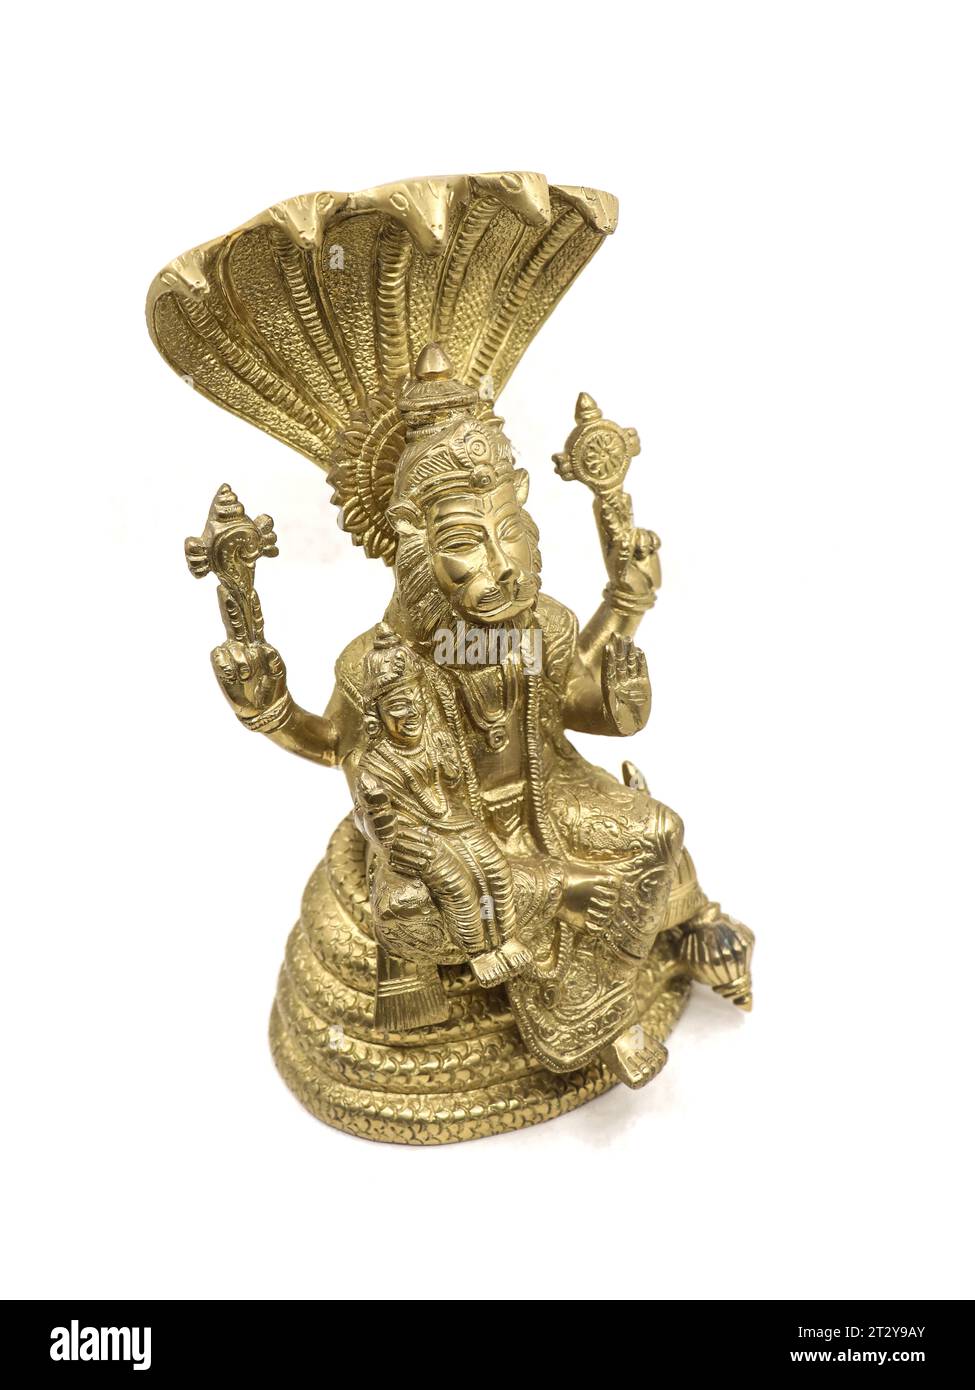 golden statue of lord vishnu avatar, narasimha lion faced with multiple hands sitting on a snake with multiple heads next to goddess lakshmi, isolated Stock Photo